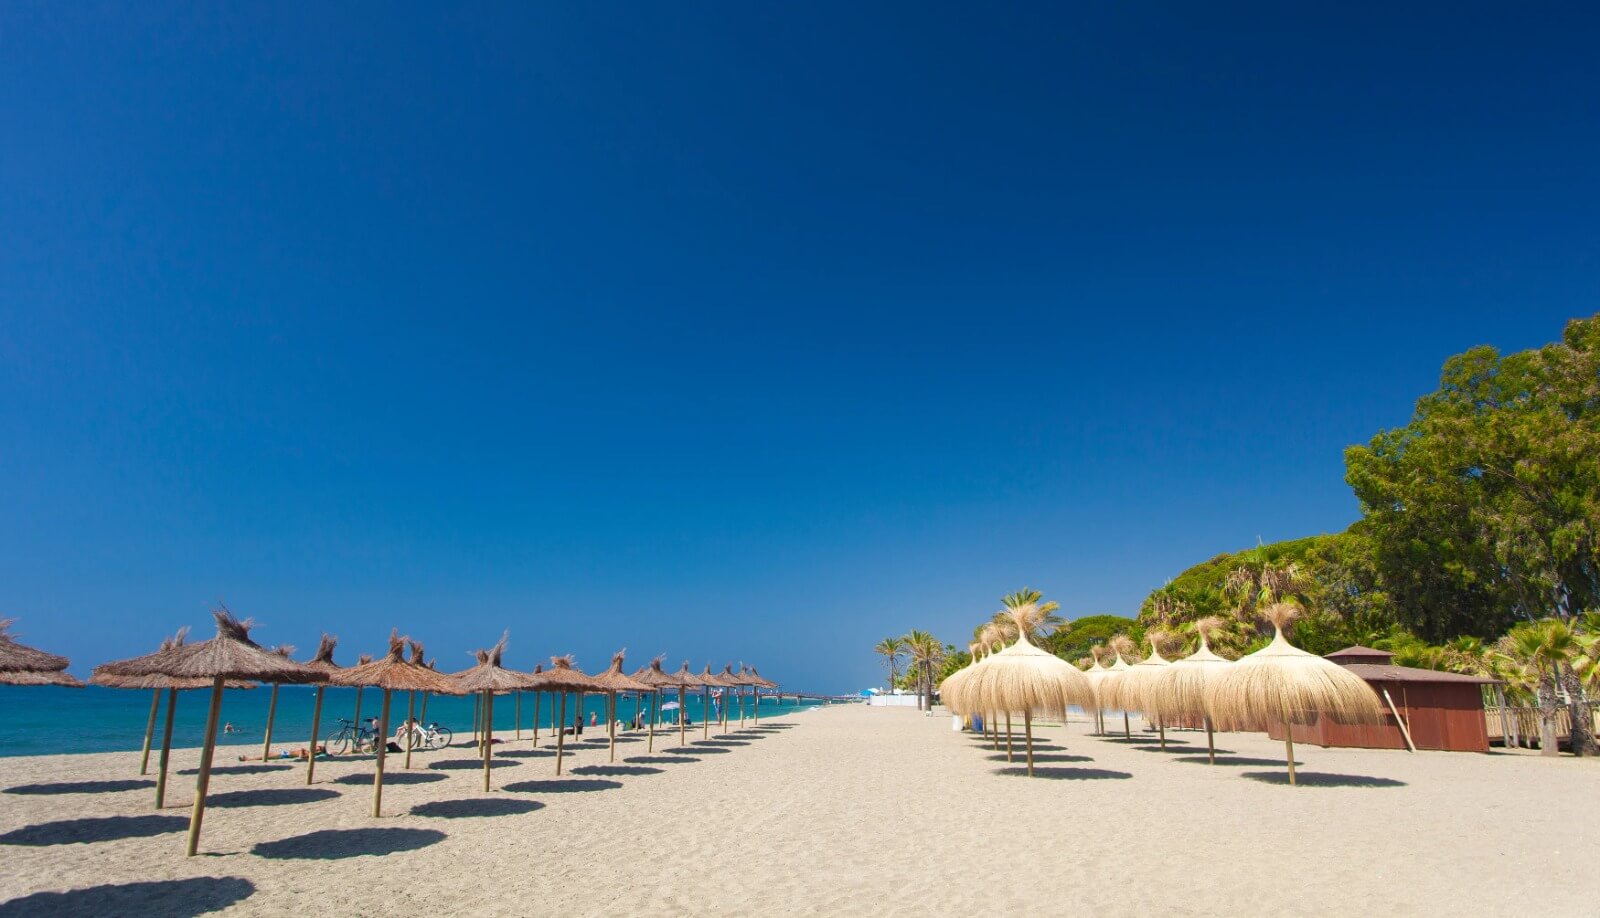 Top 5 Best Beaches In Marbella Spain For Your Next Vacation